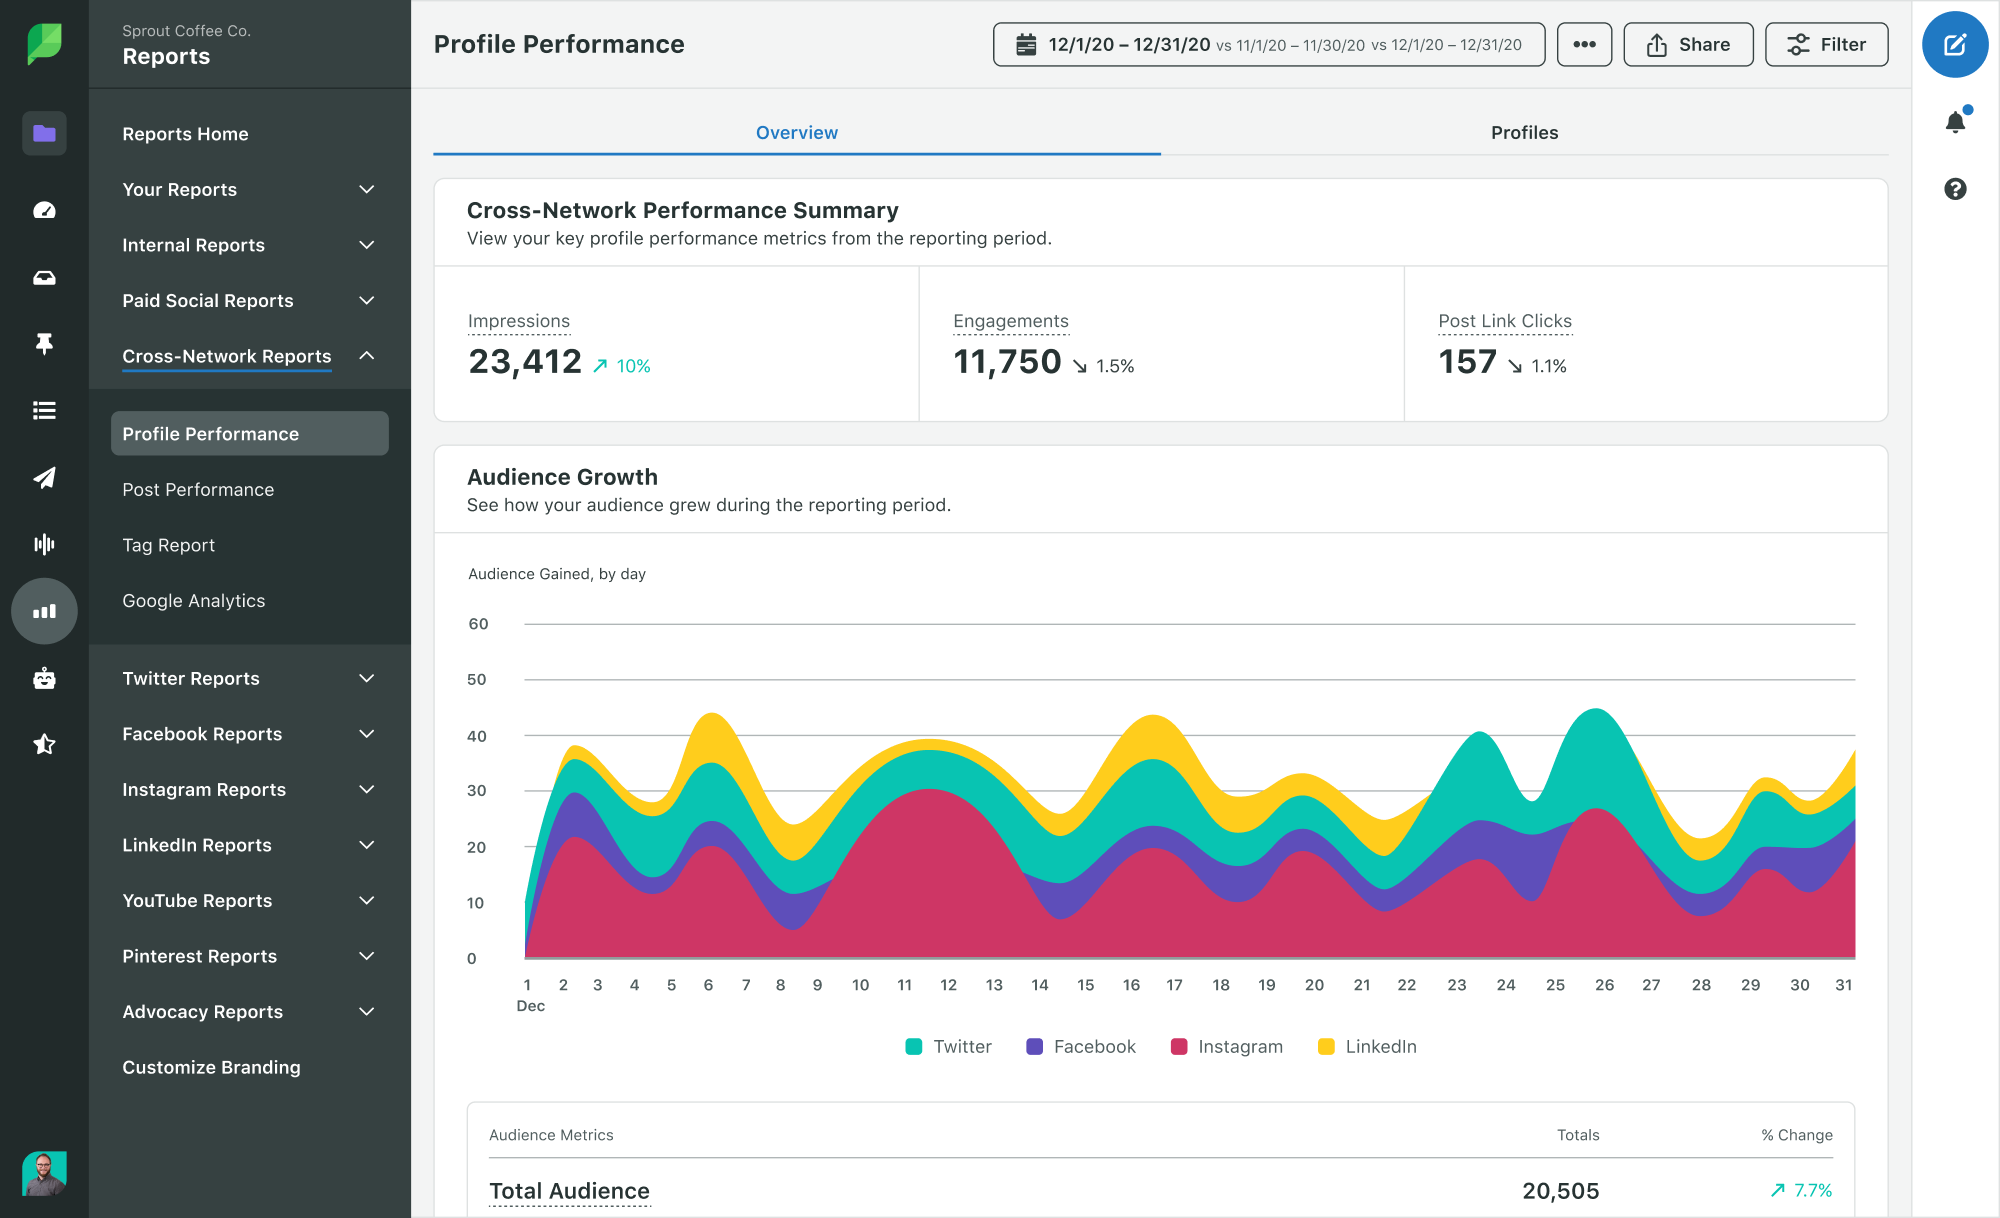 profile performance report from sprout showing impressions